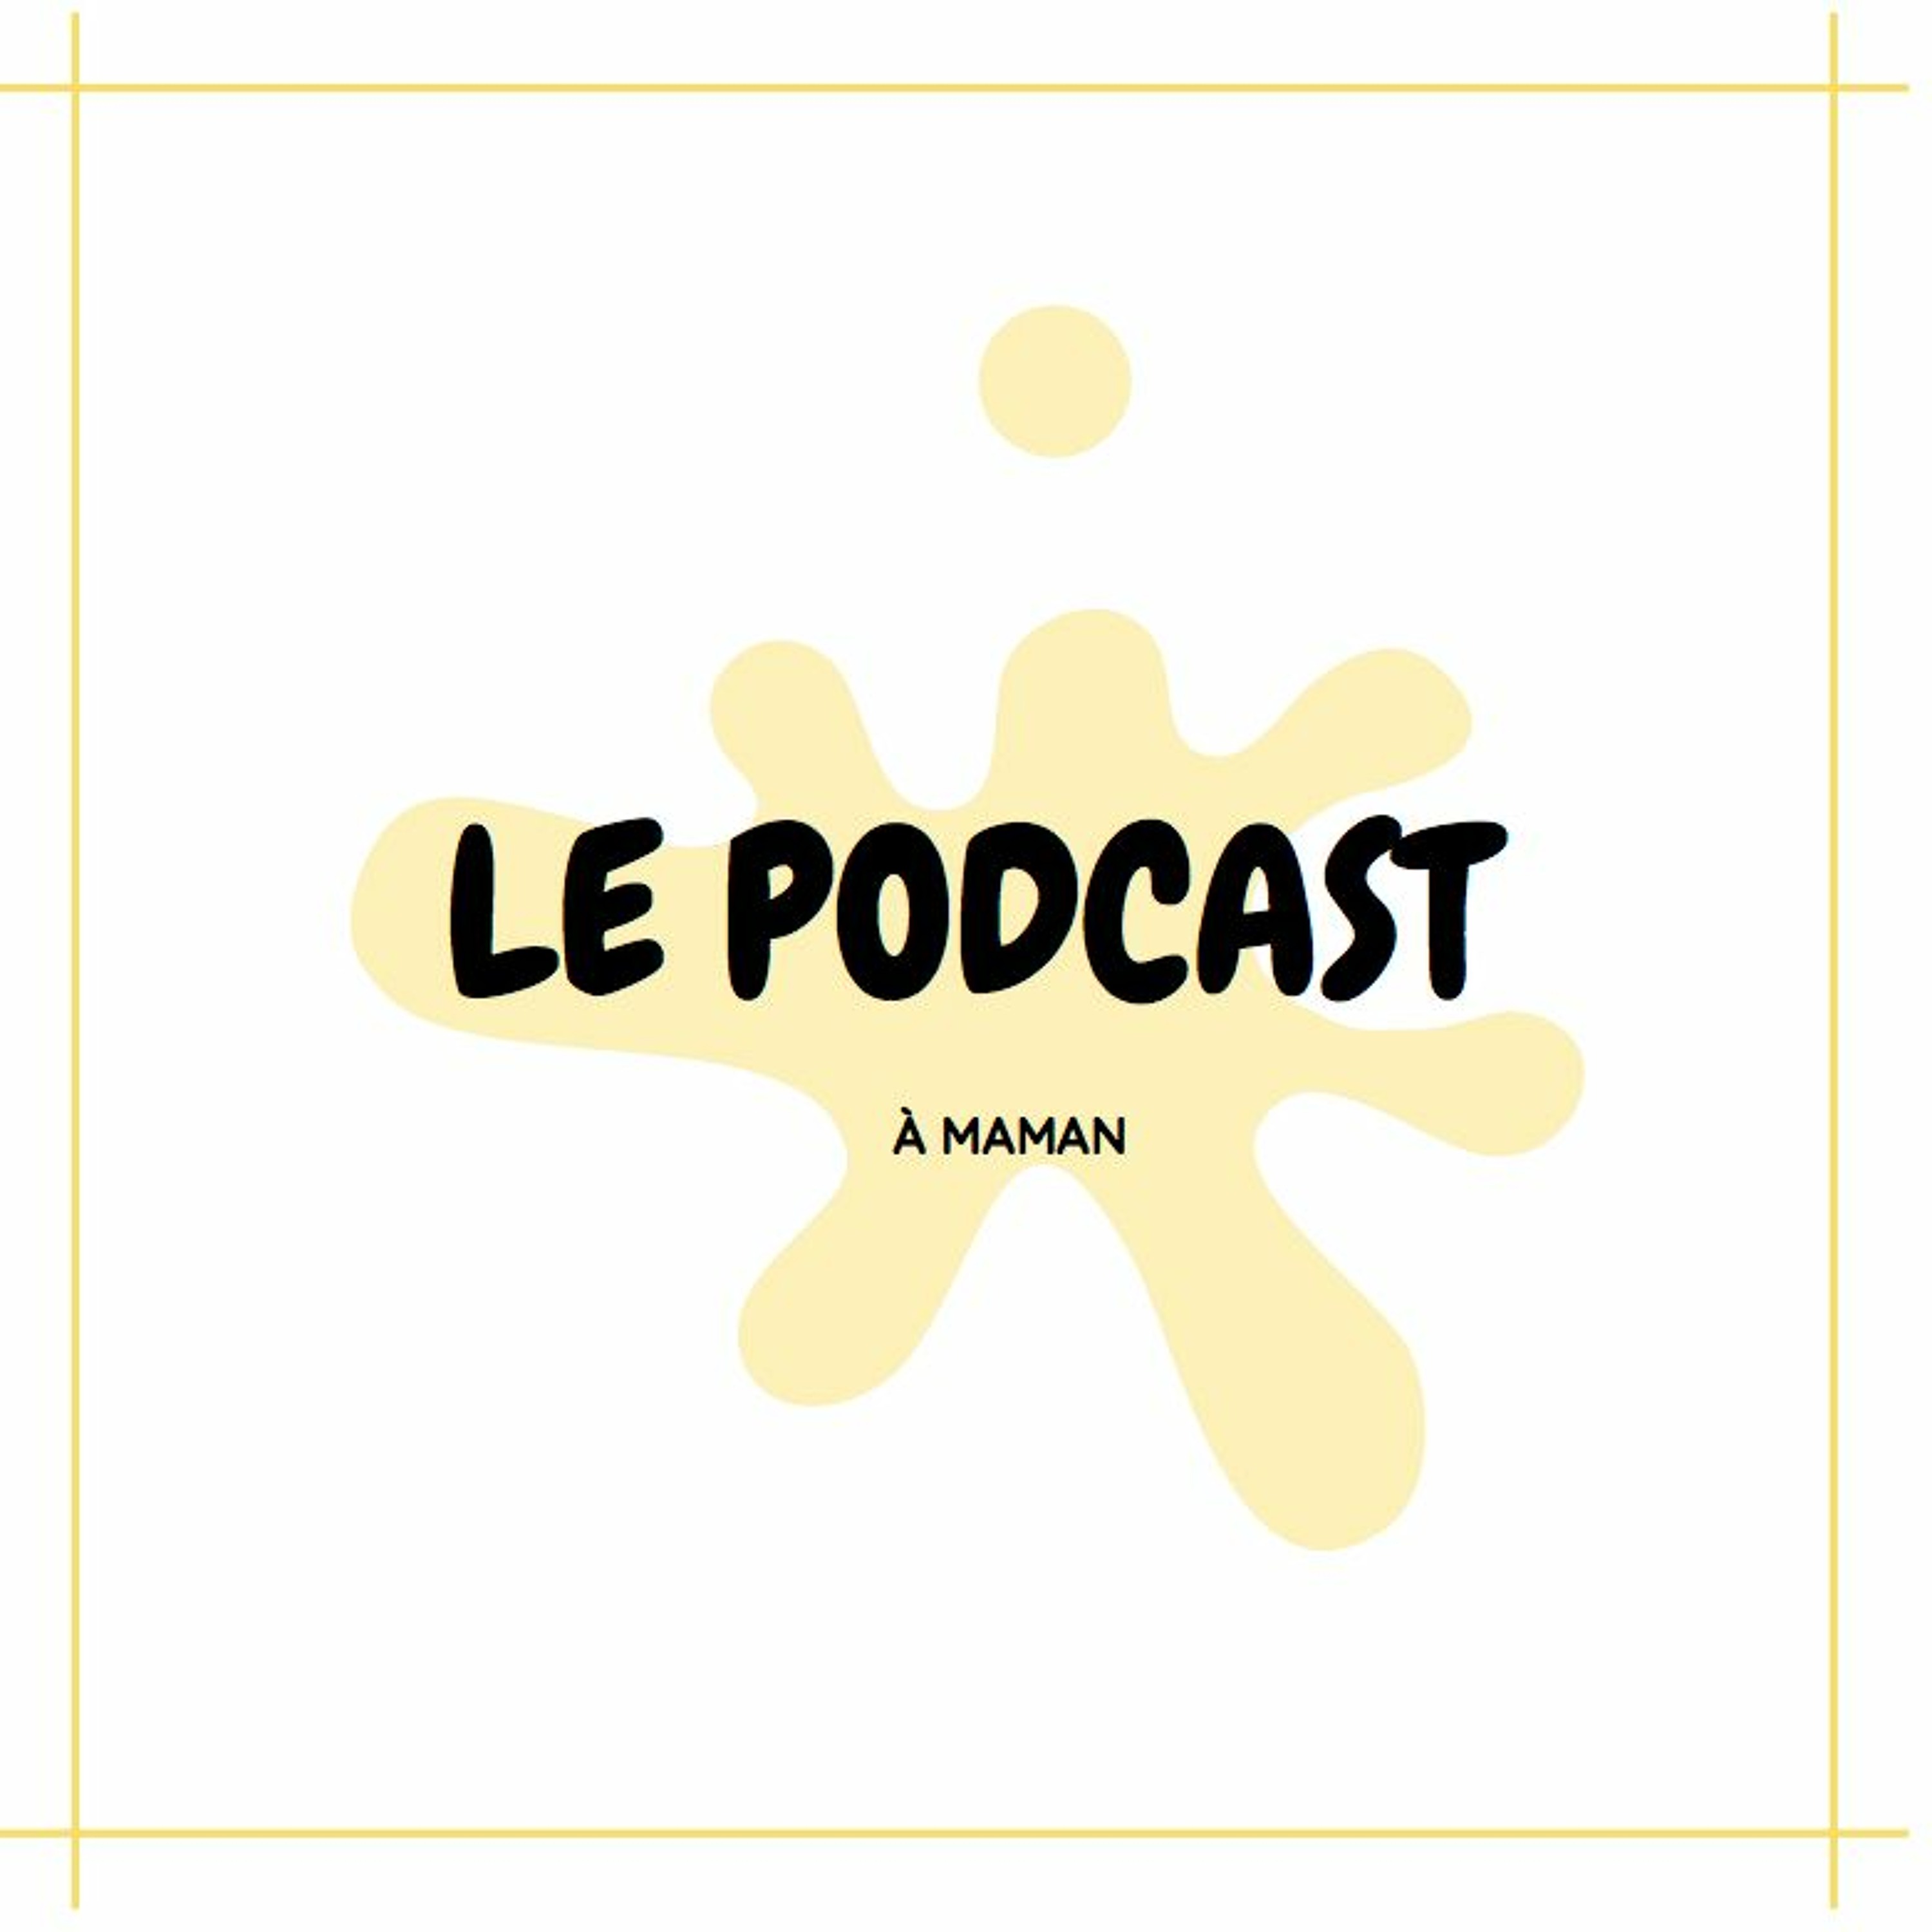 Réussir un podcast d'interview (made with Spreaker)